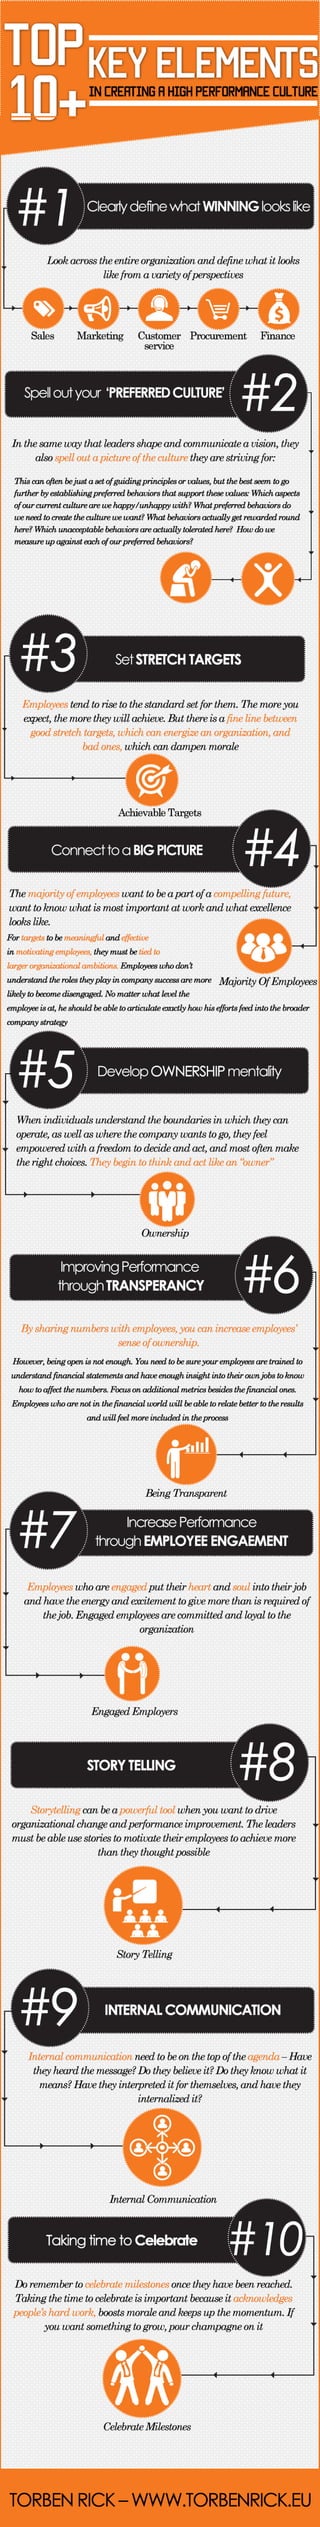 Infographic: How to create a high performance organization